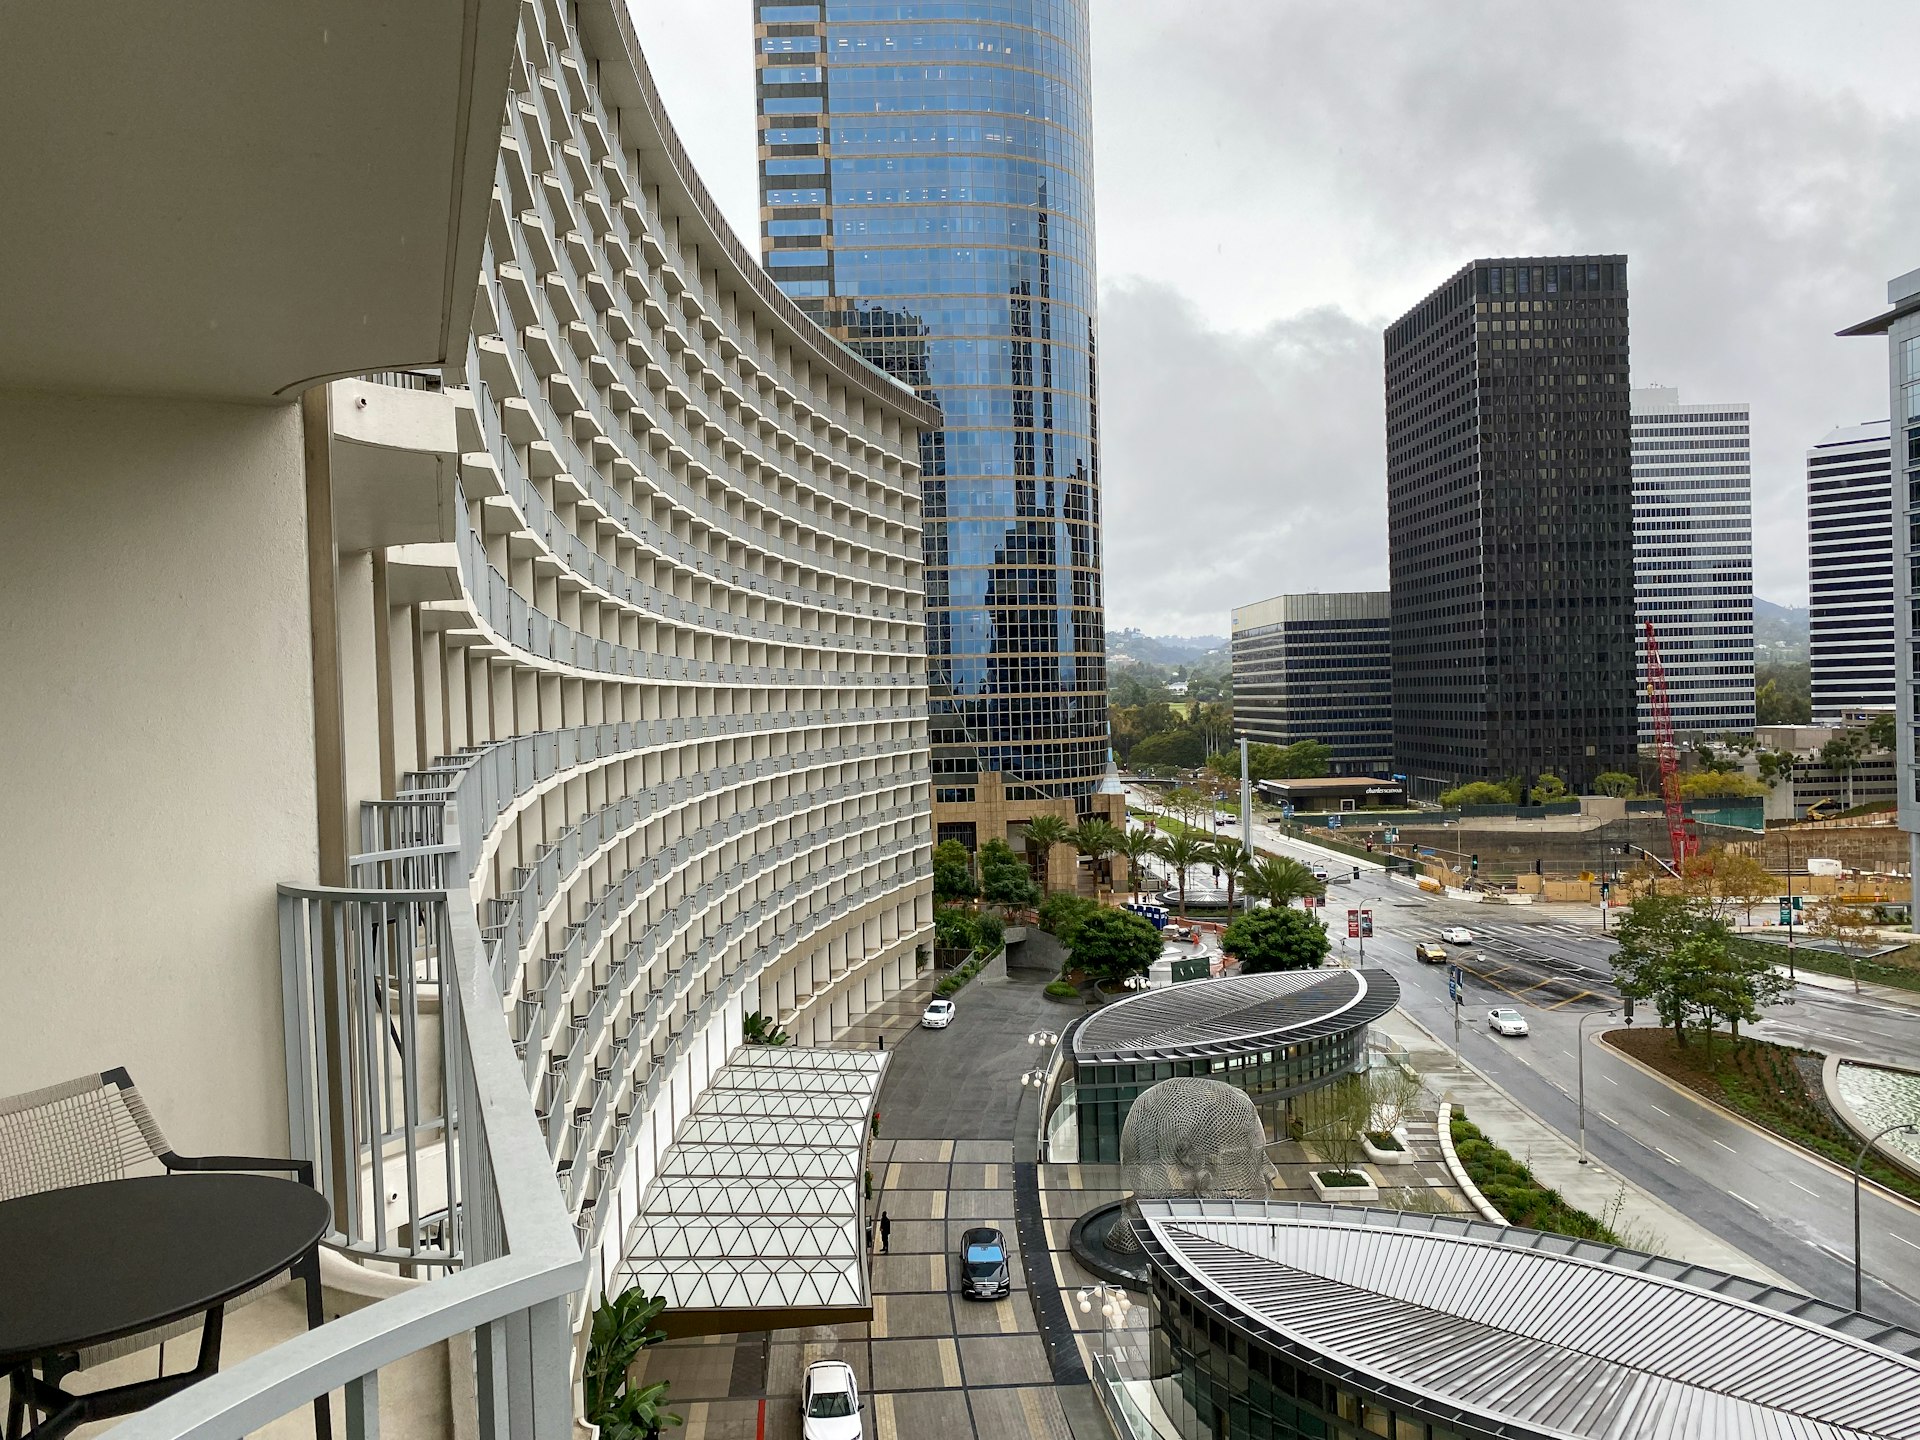 The view from a room at Fairmont Century Plaza; Los Angeles, California